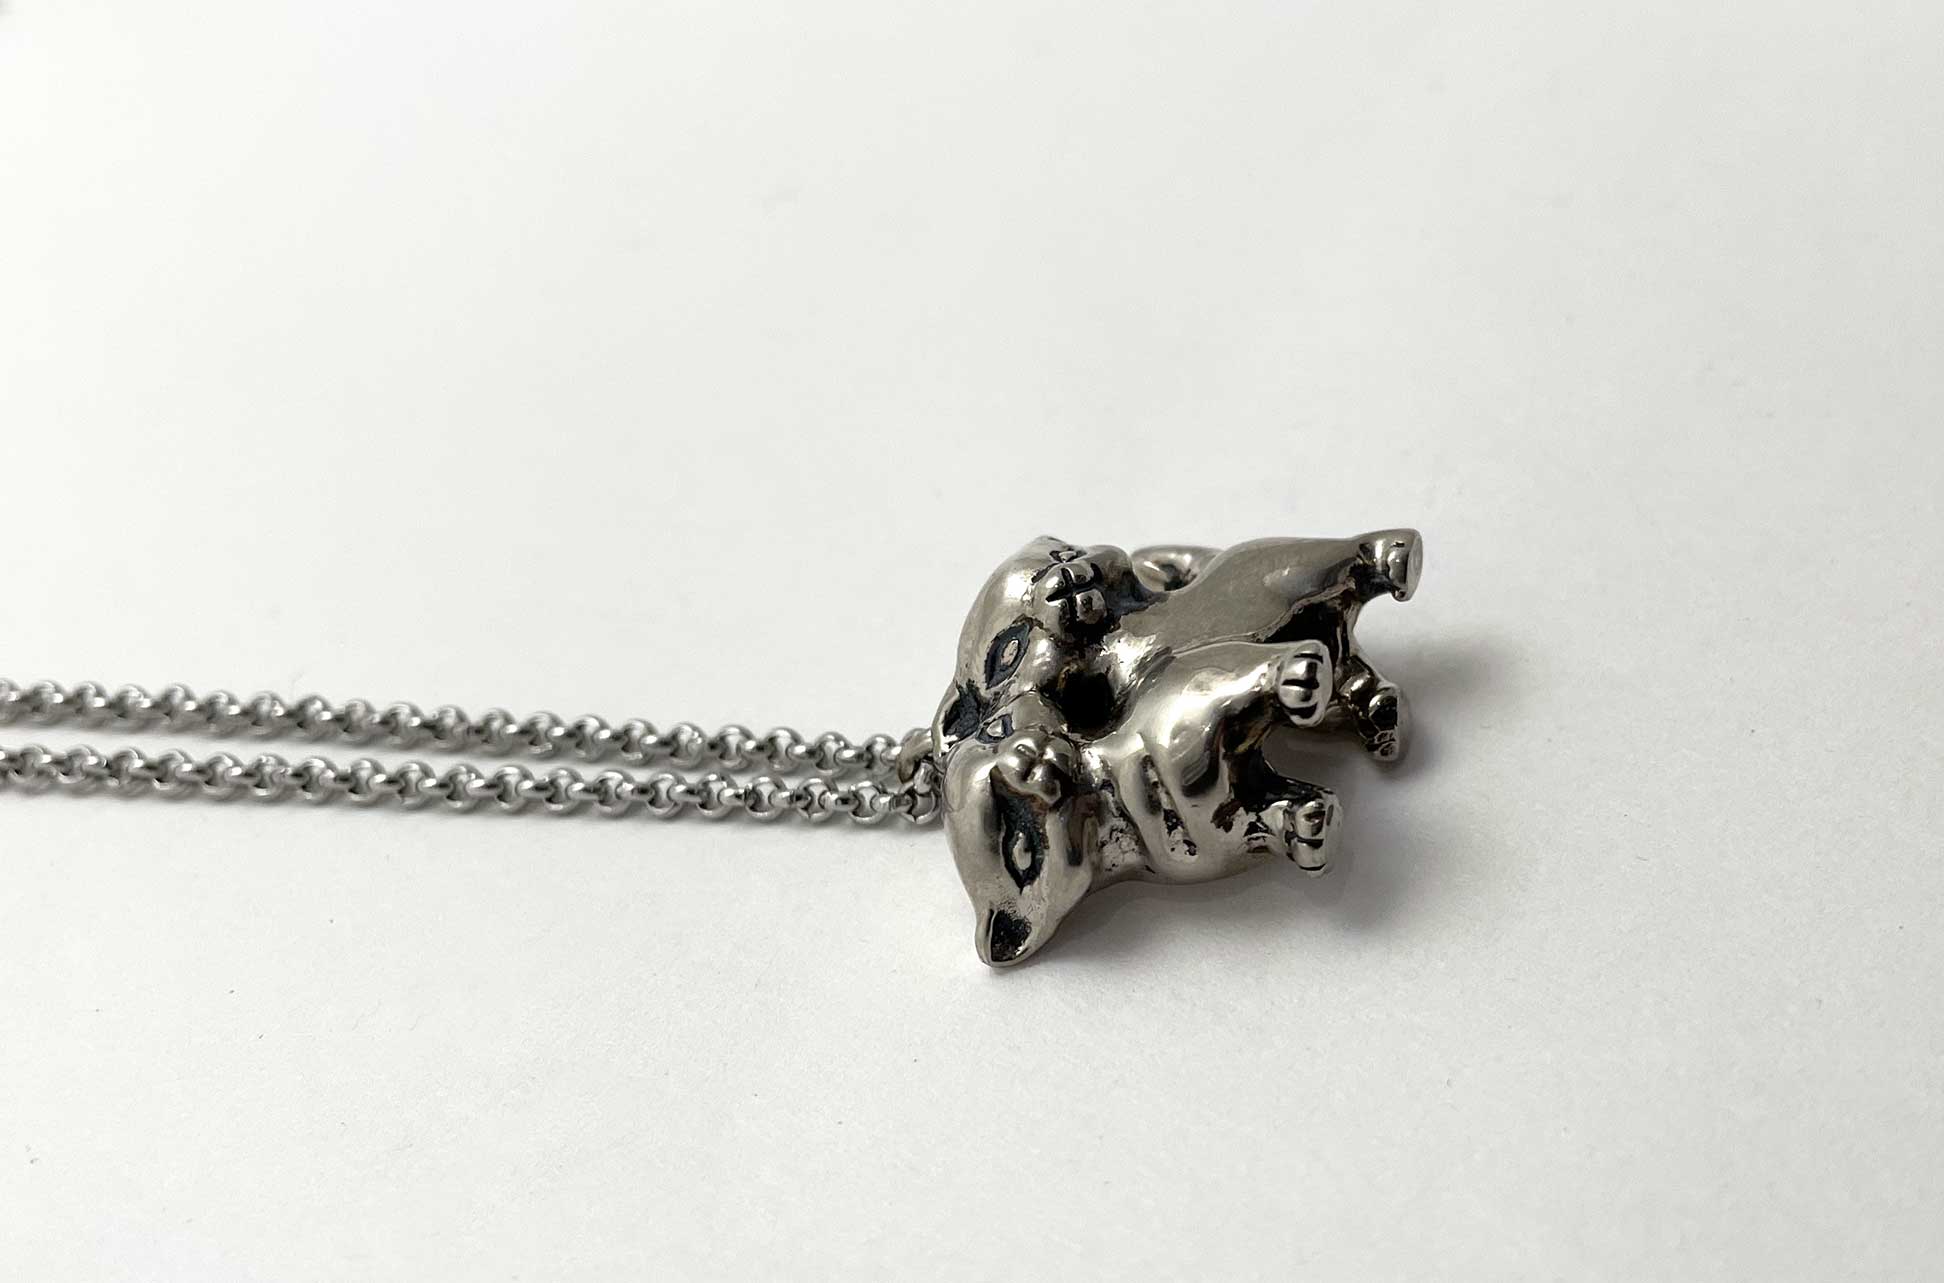 Two Headed Cat Necklace- Ready to Ship